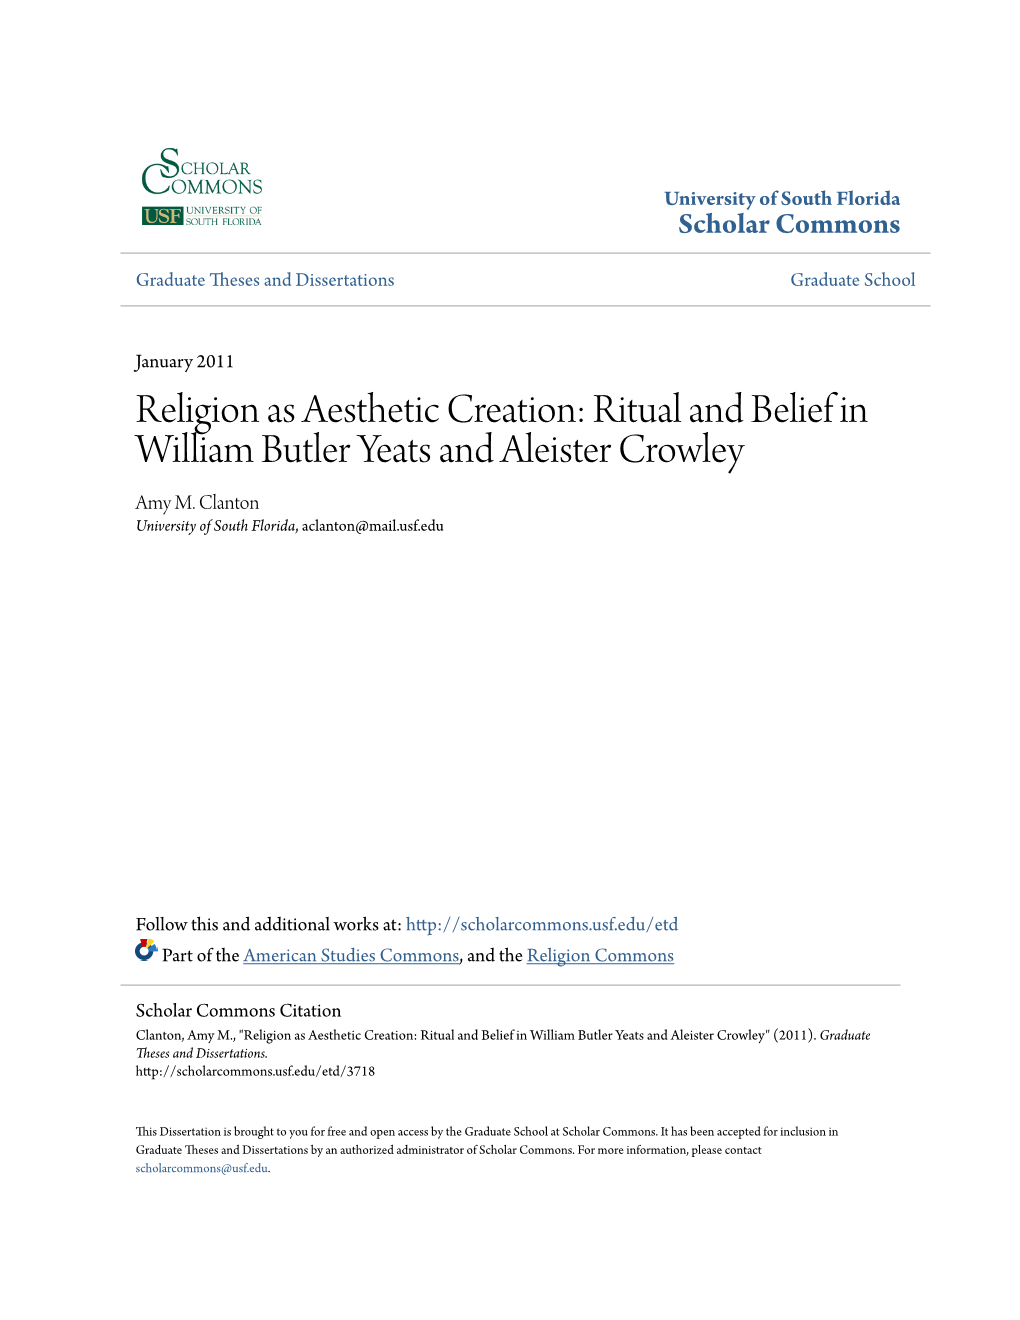 Ritual and Belief in William Butler Yeats and Aleister Crowley Amy M